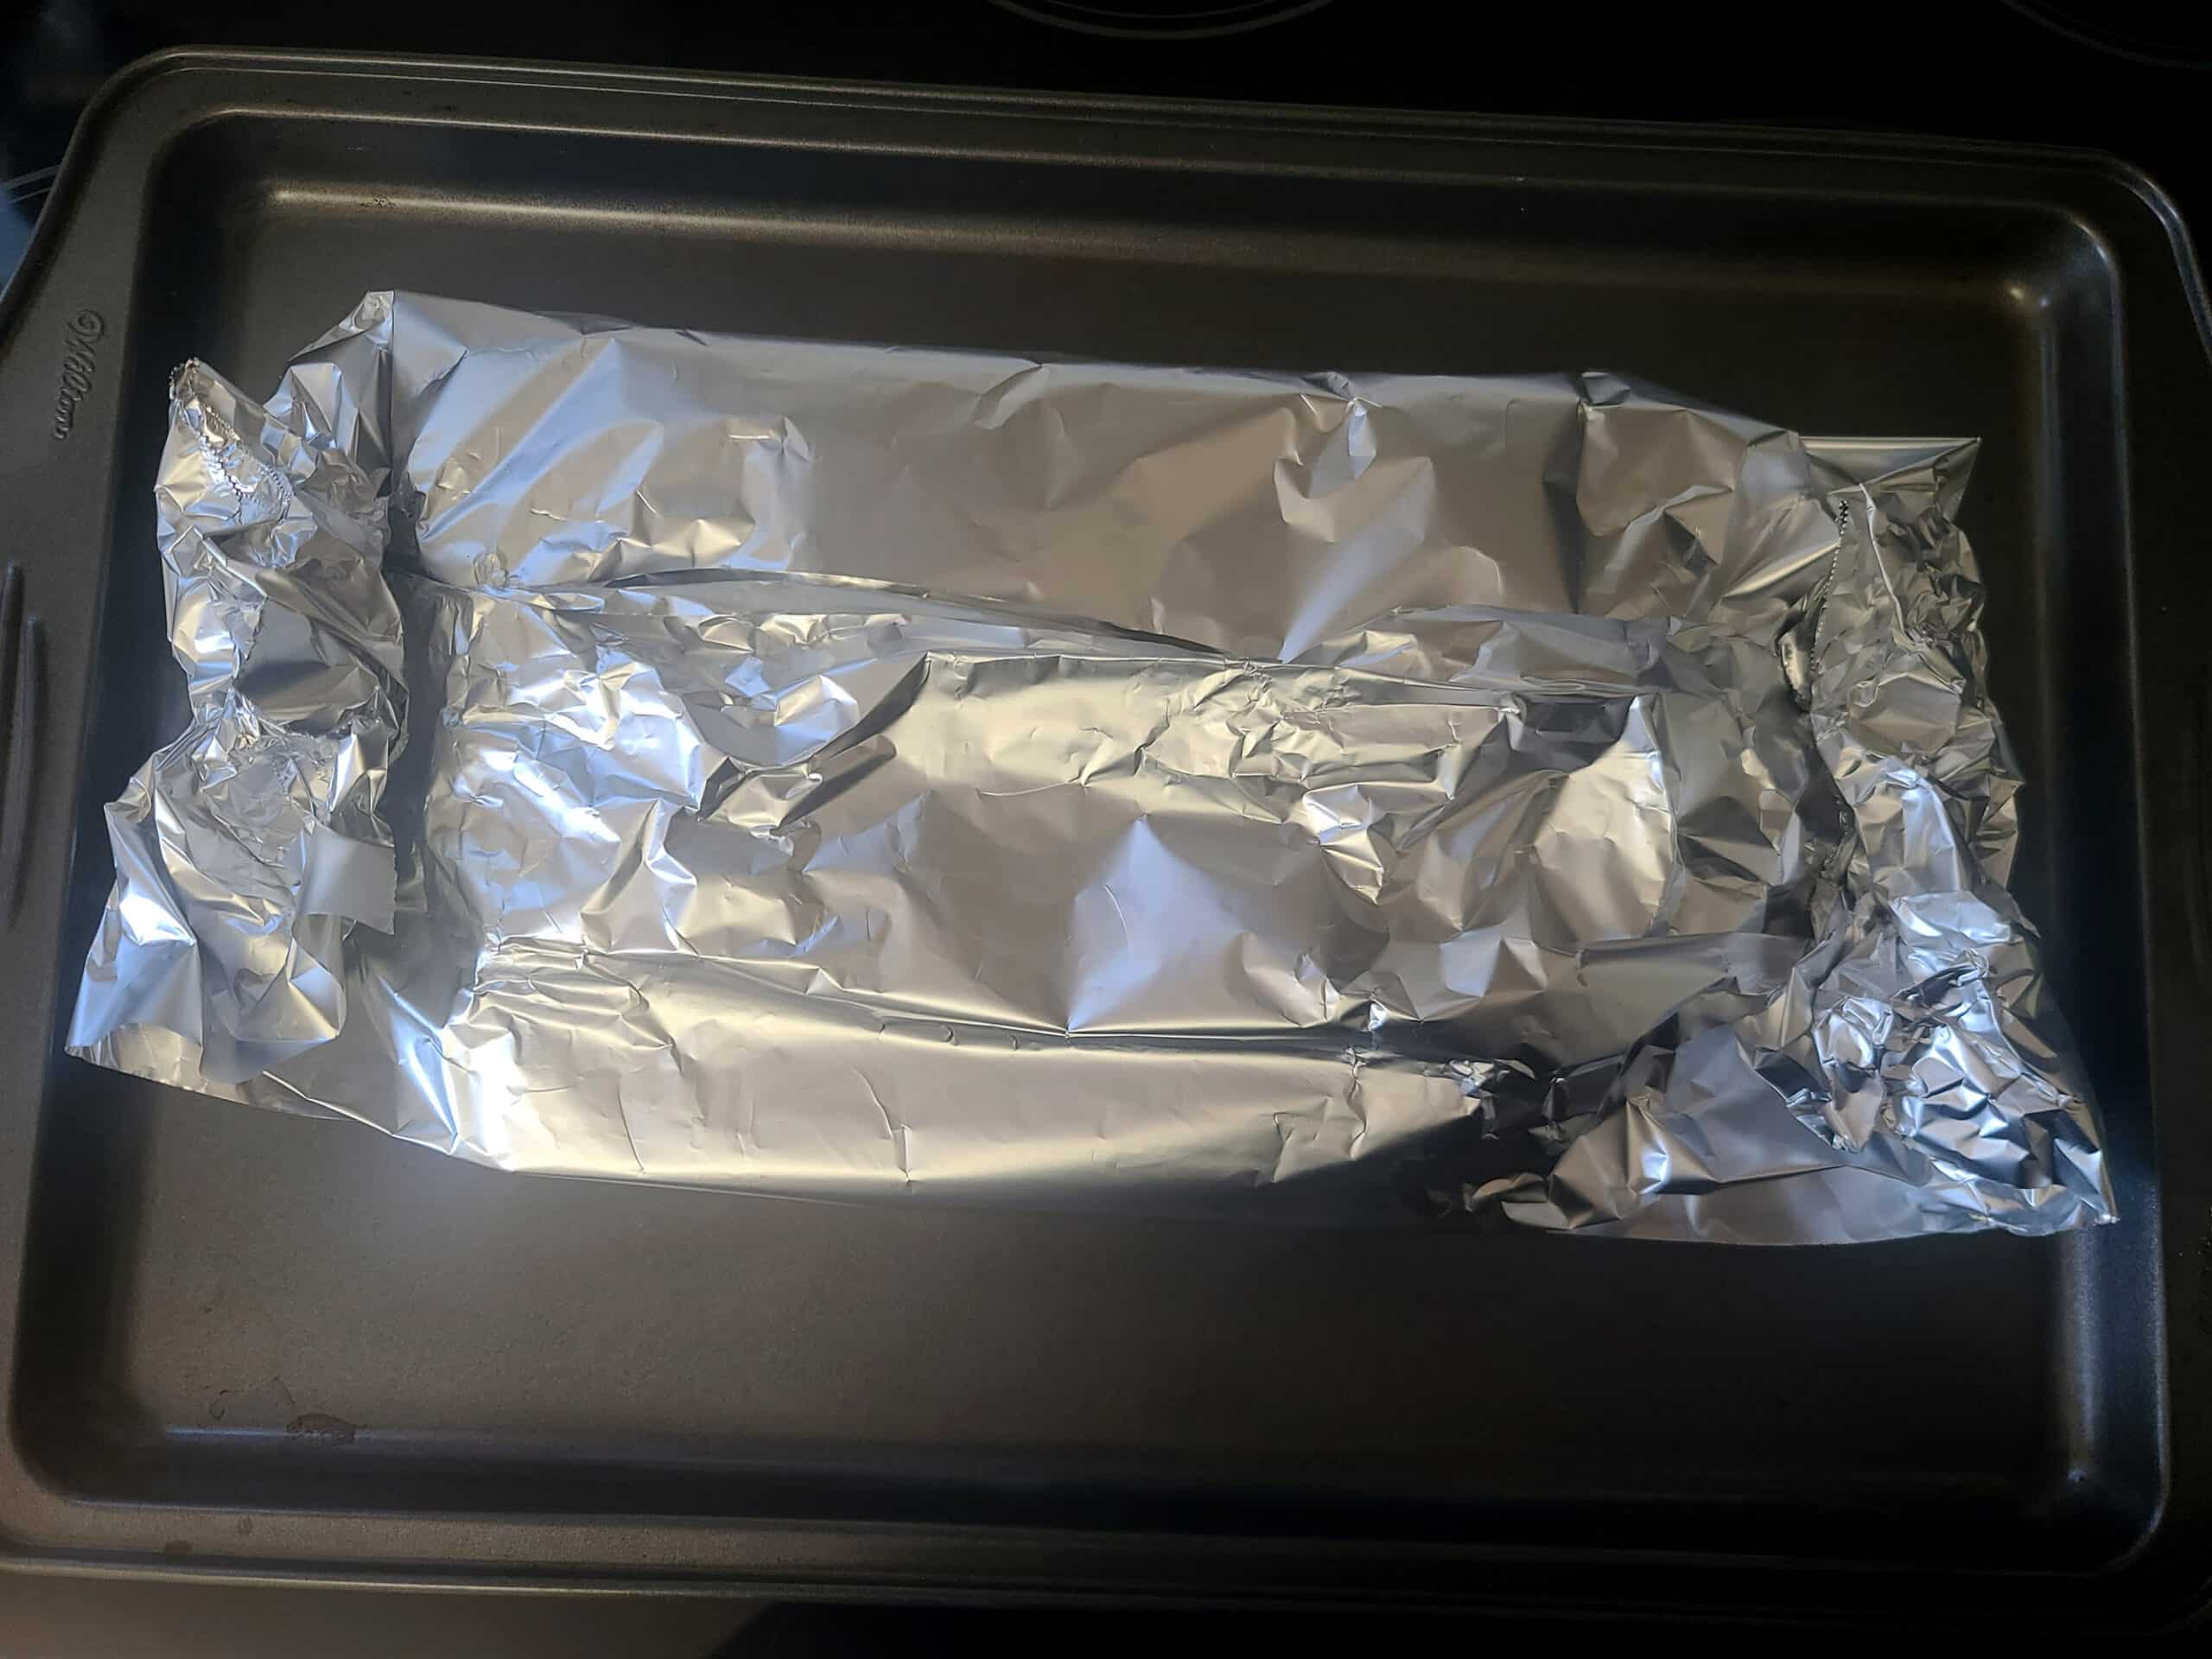 A pan with a foil pouch of garlic on it.